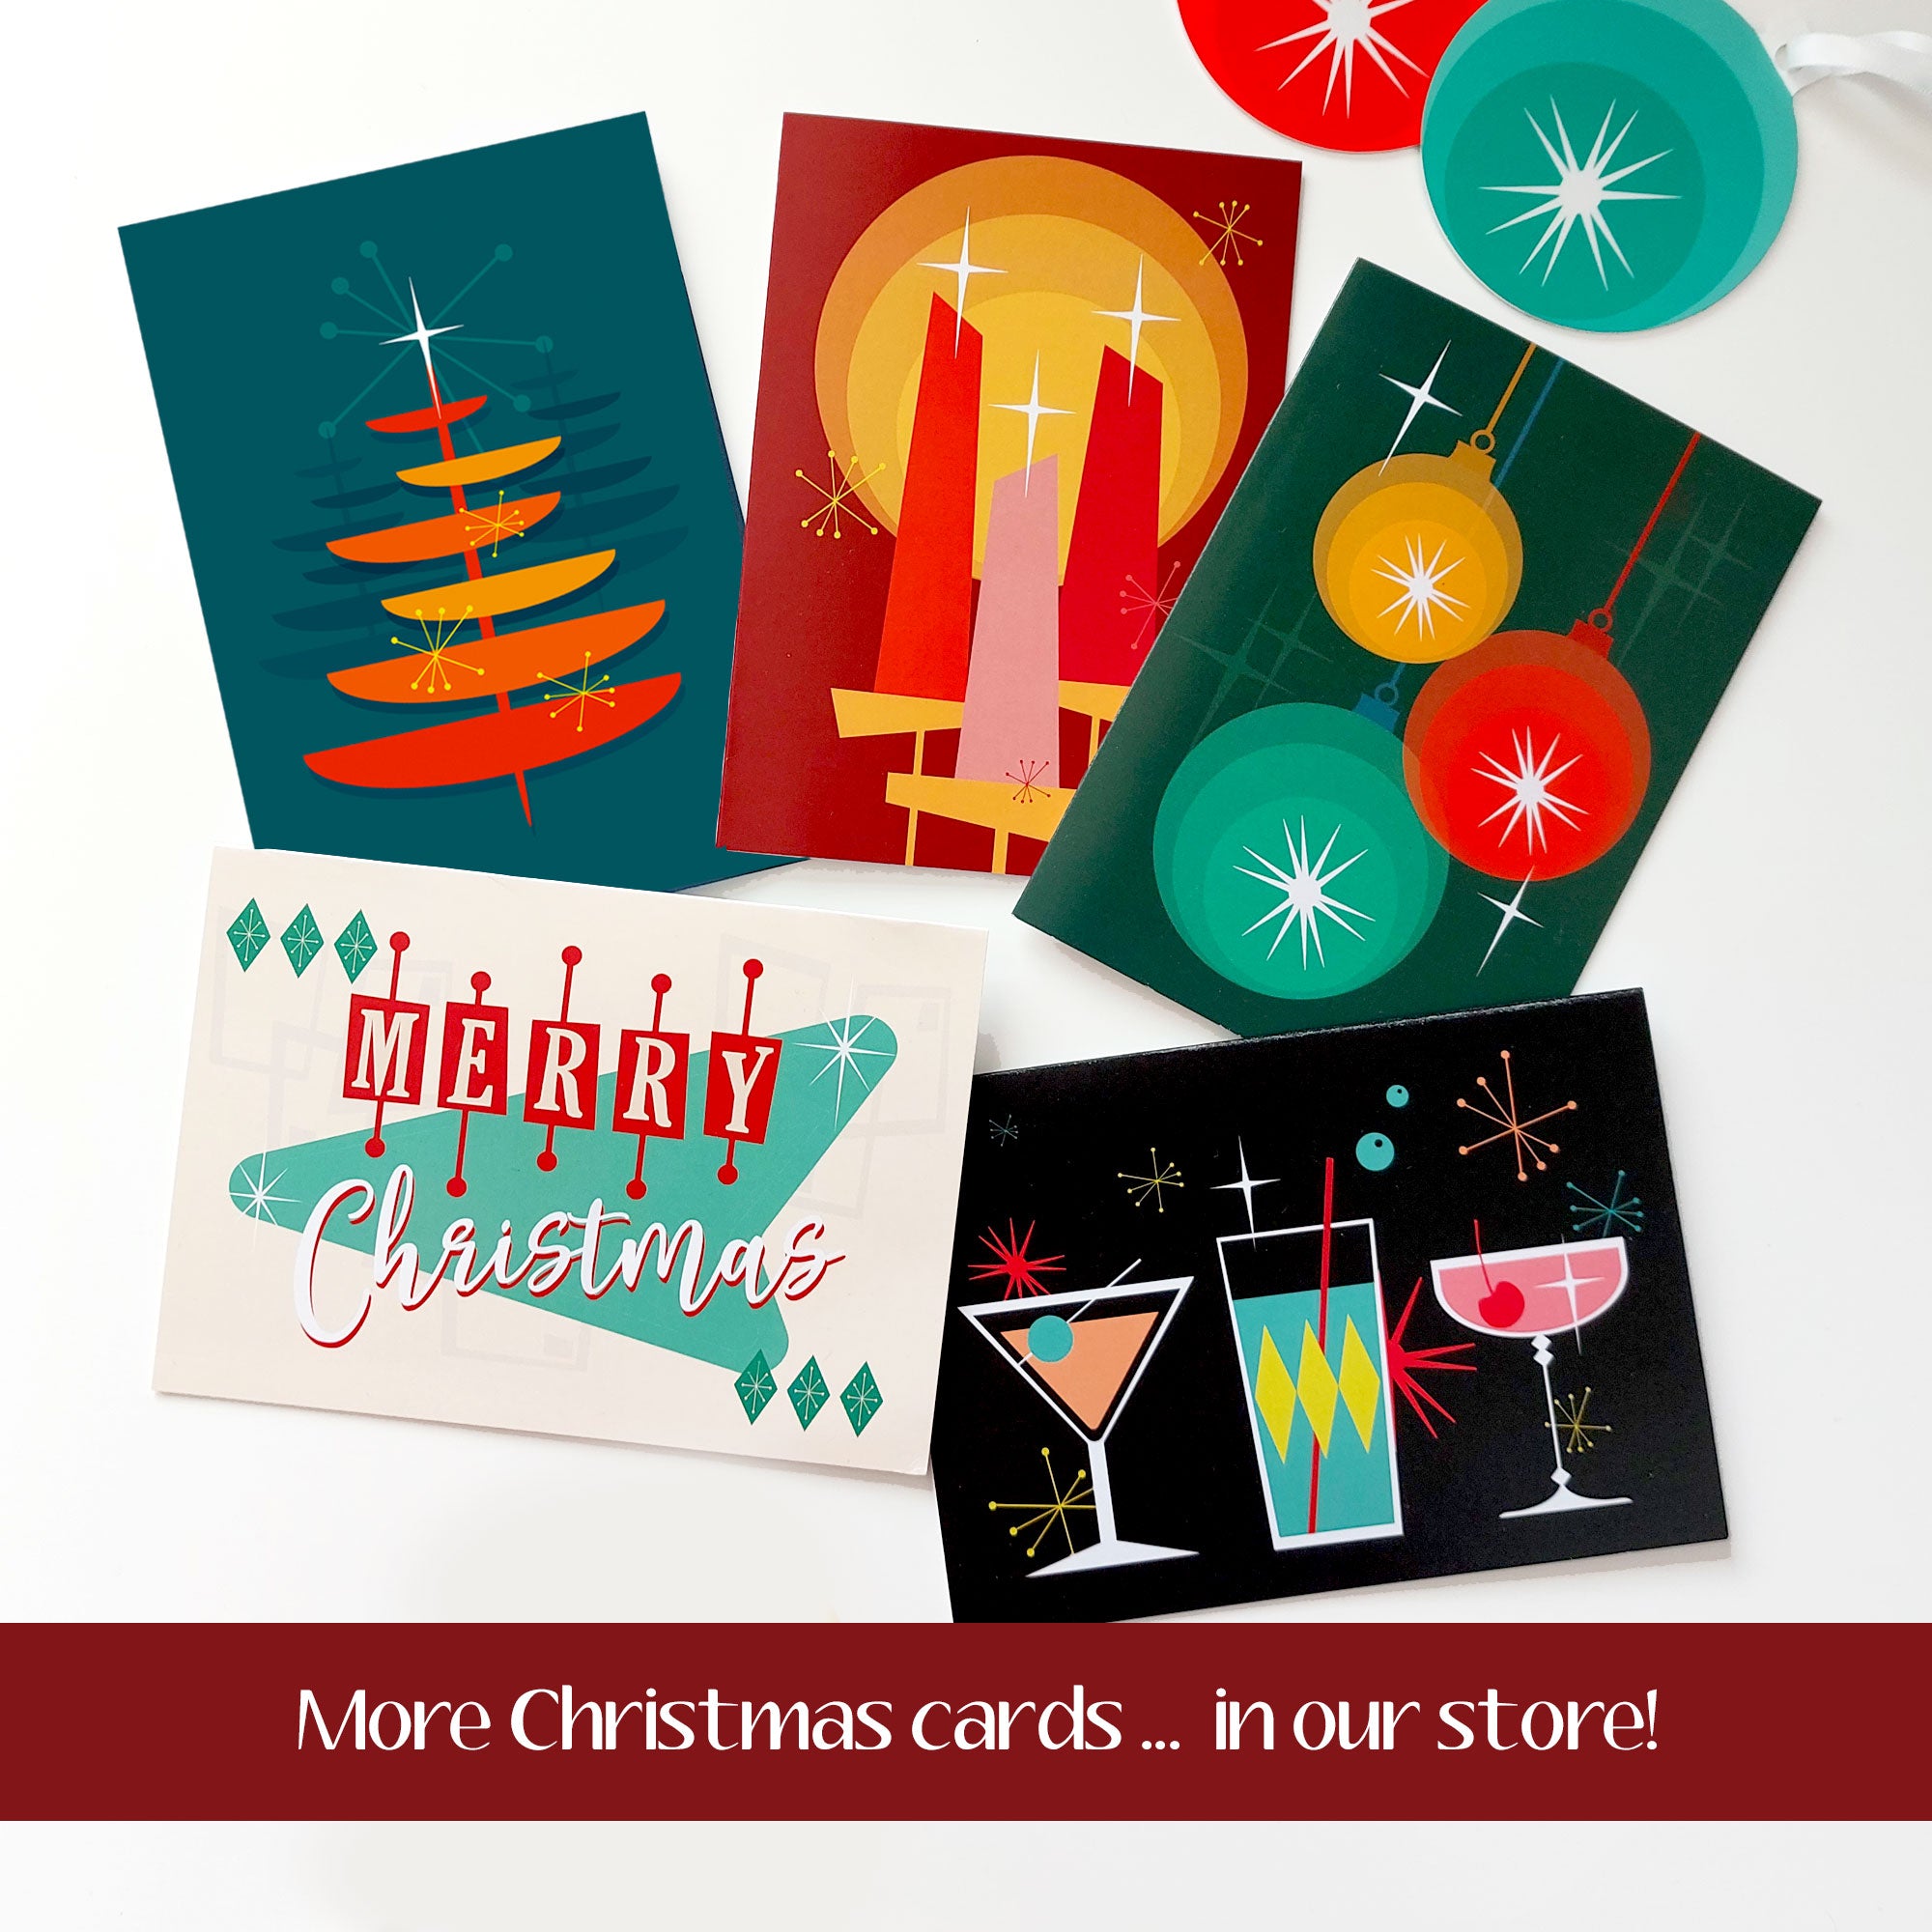 5 retro style Christmas cards lie scattered on a white table. Text reads "More Christmas cards in our store!" | The Inkabilly Emporium